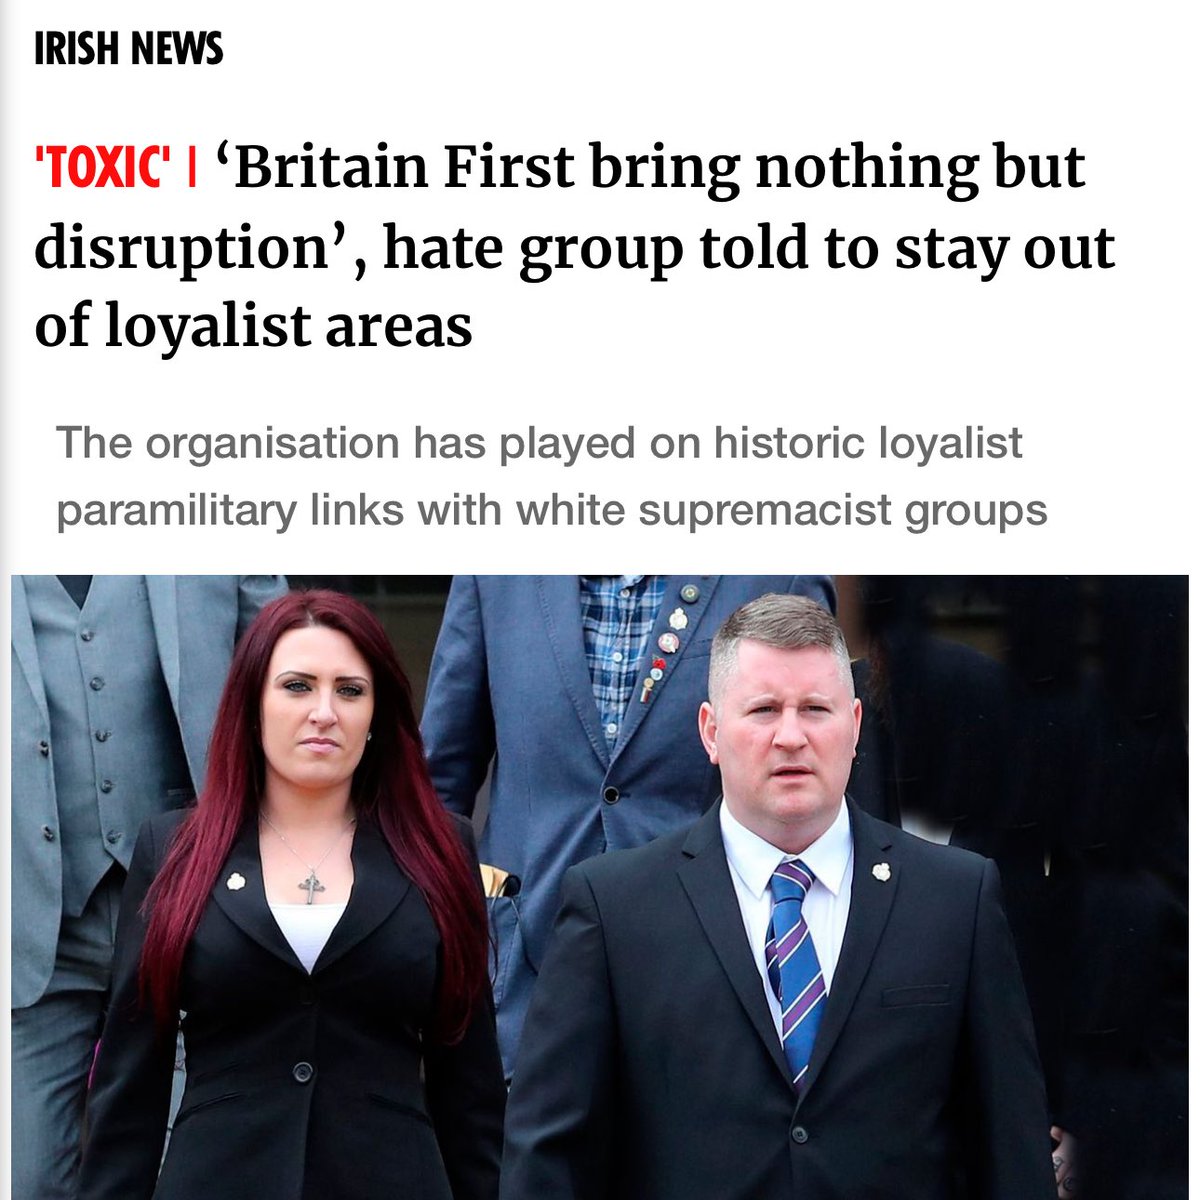 Ah here! So many in the Irish far right had been taking direction from a former UDA commander and some Britain First clowns but now some of them have fallen out. Irish far right are such laughable stooges.